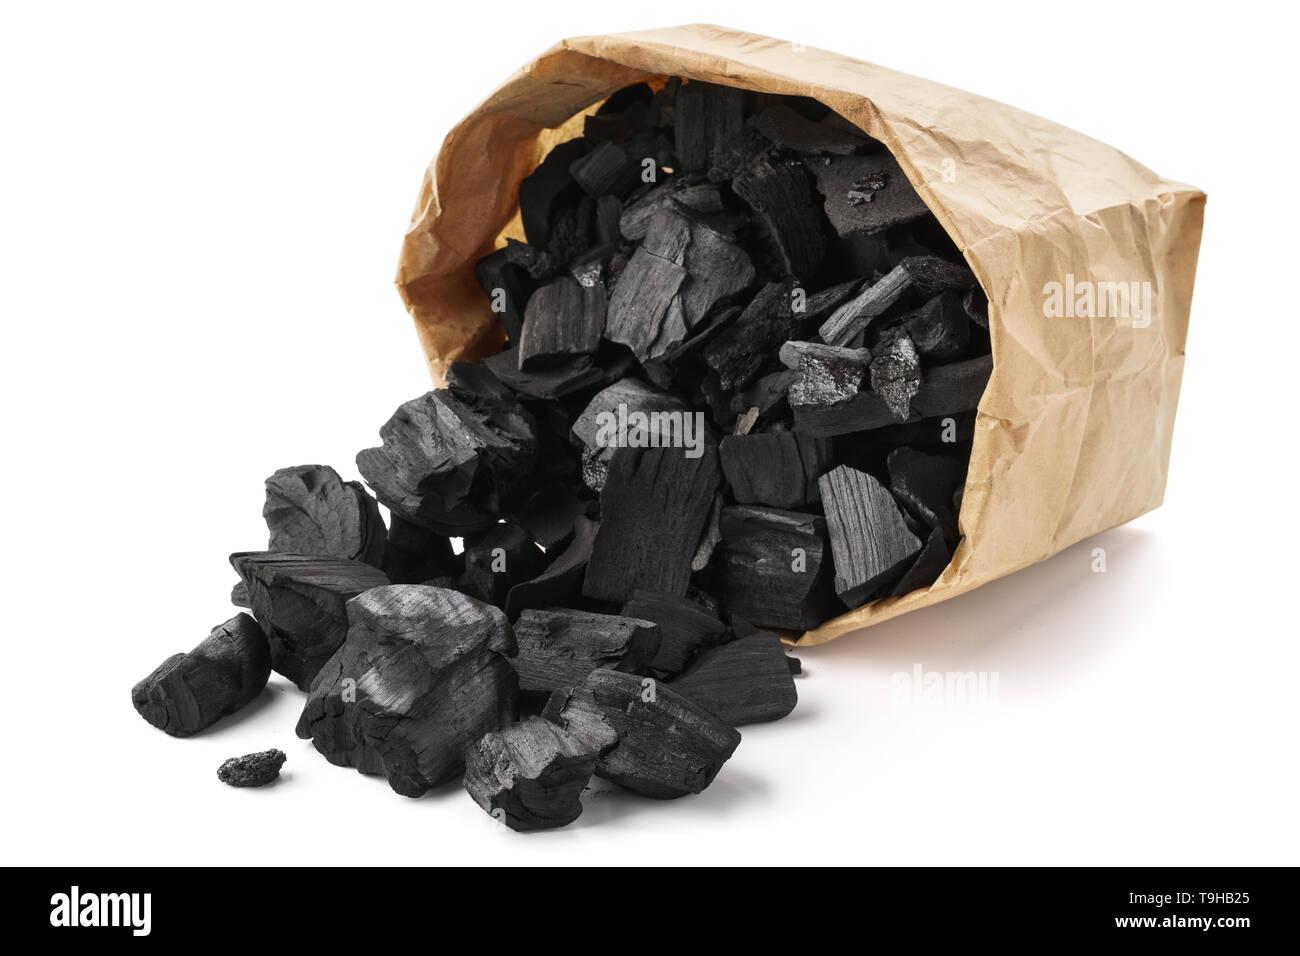 Discover more than 85 charcoal paper bags - esthdonghoadian